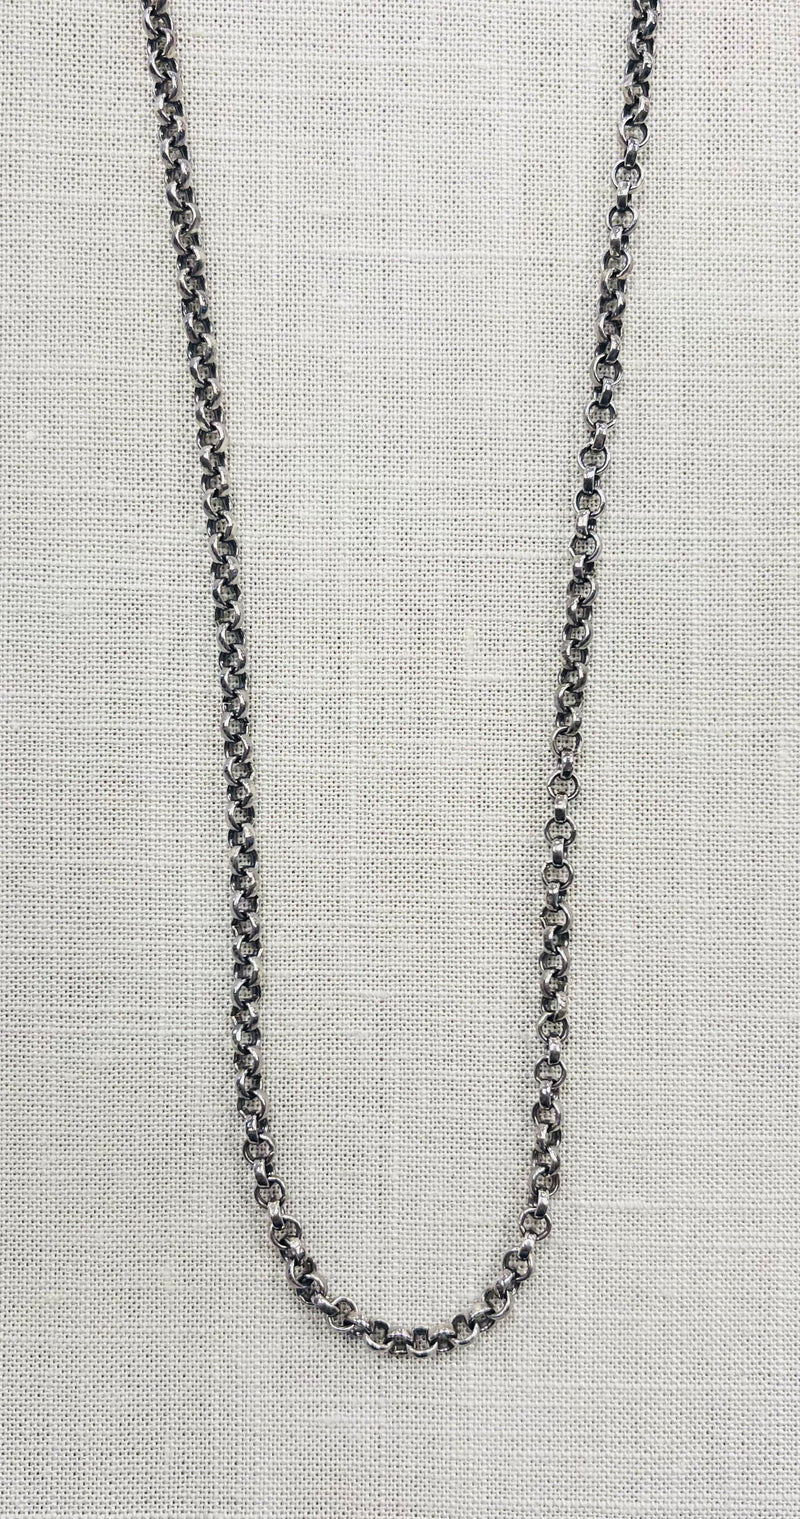 Waxing Poetic Small Rolo Chain - Sterling Silver